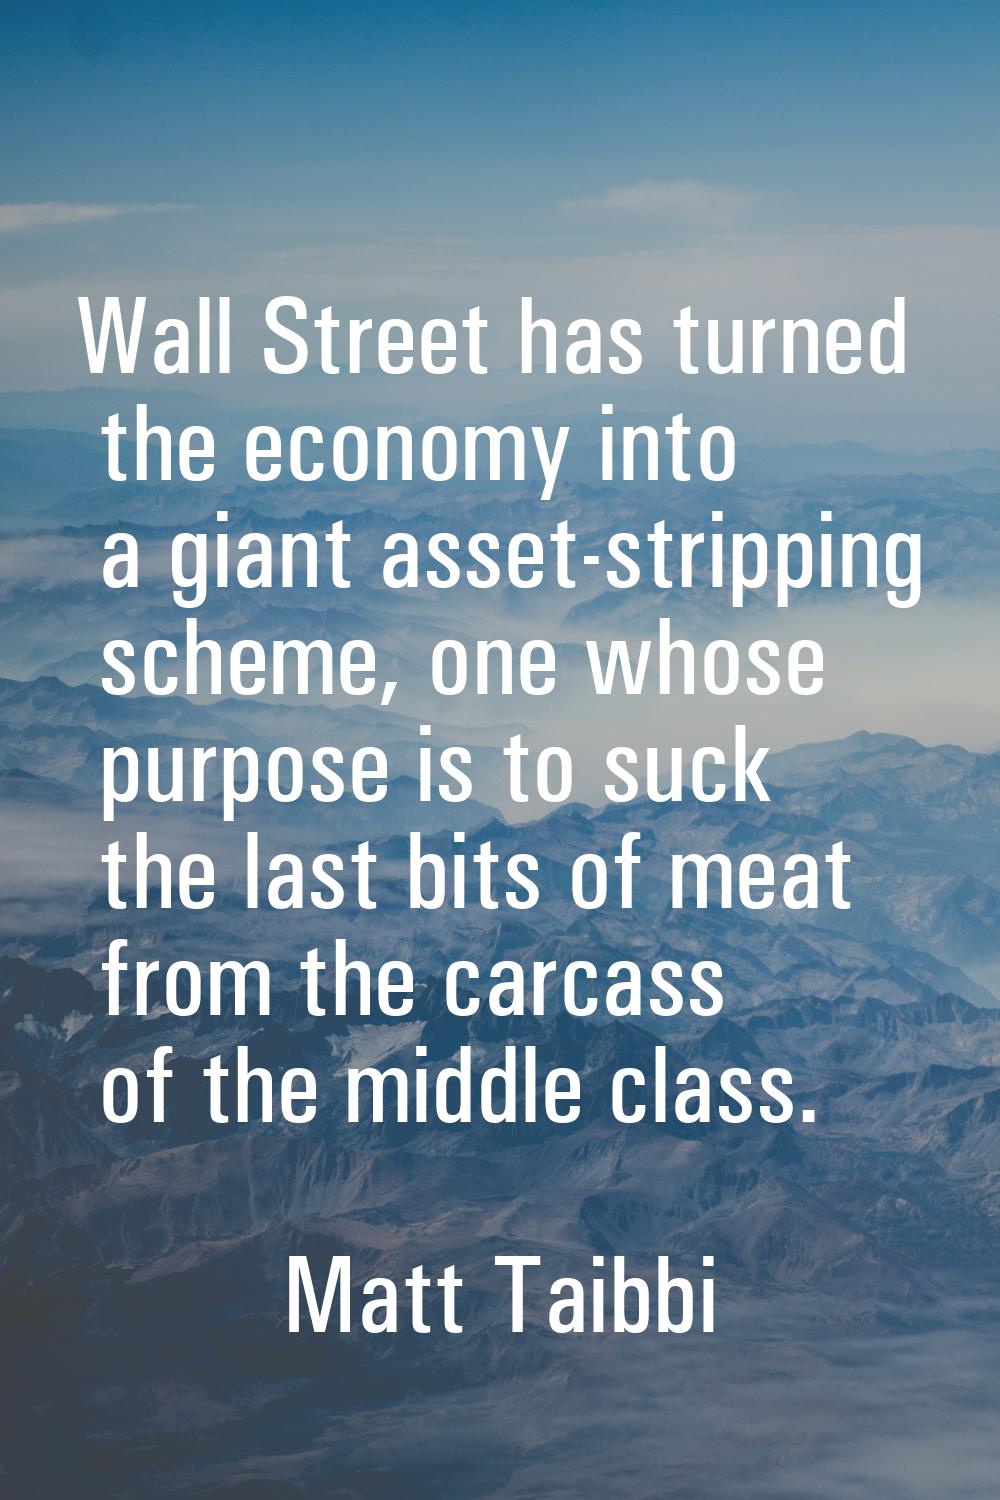 Wall Street has turned the economy into a giant asset-stripping scheme, one whose purpose is to suc